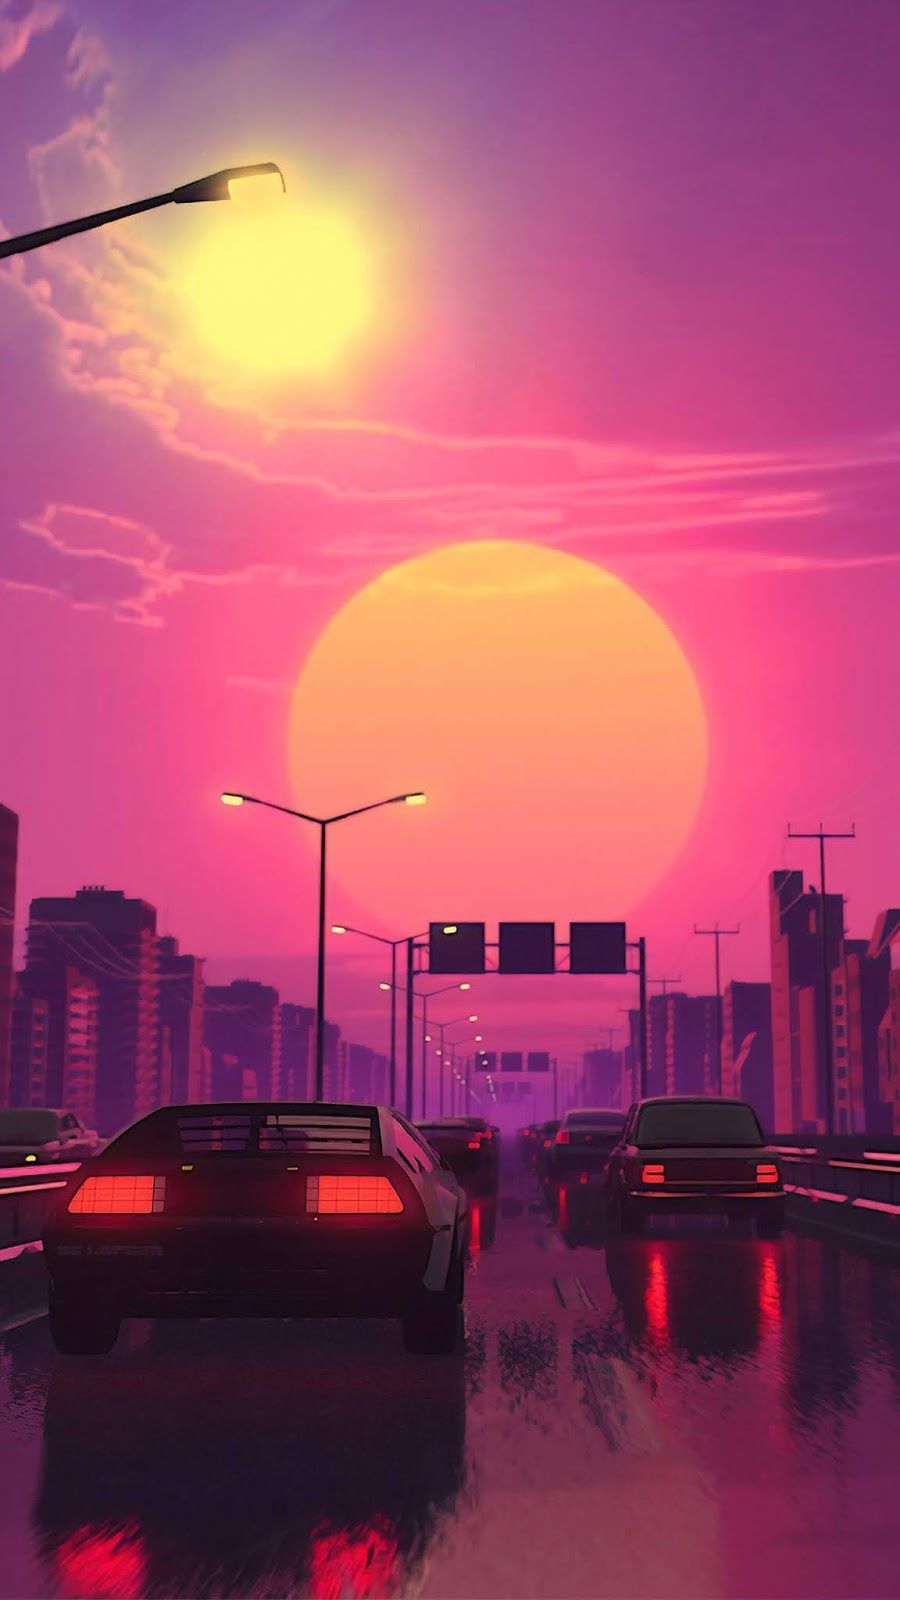 Retro Sunset Aesthetic Wallpapers - Wallpaper Cave